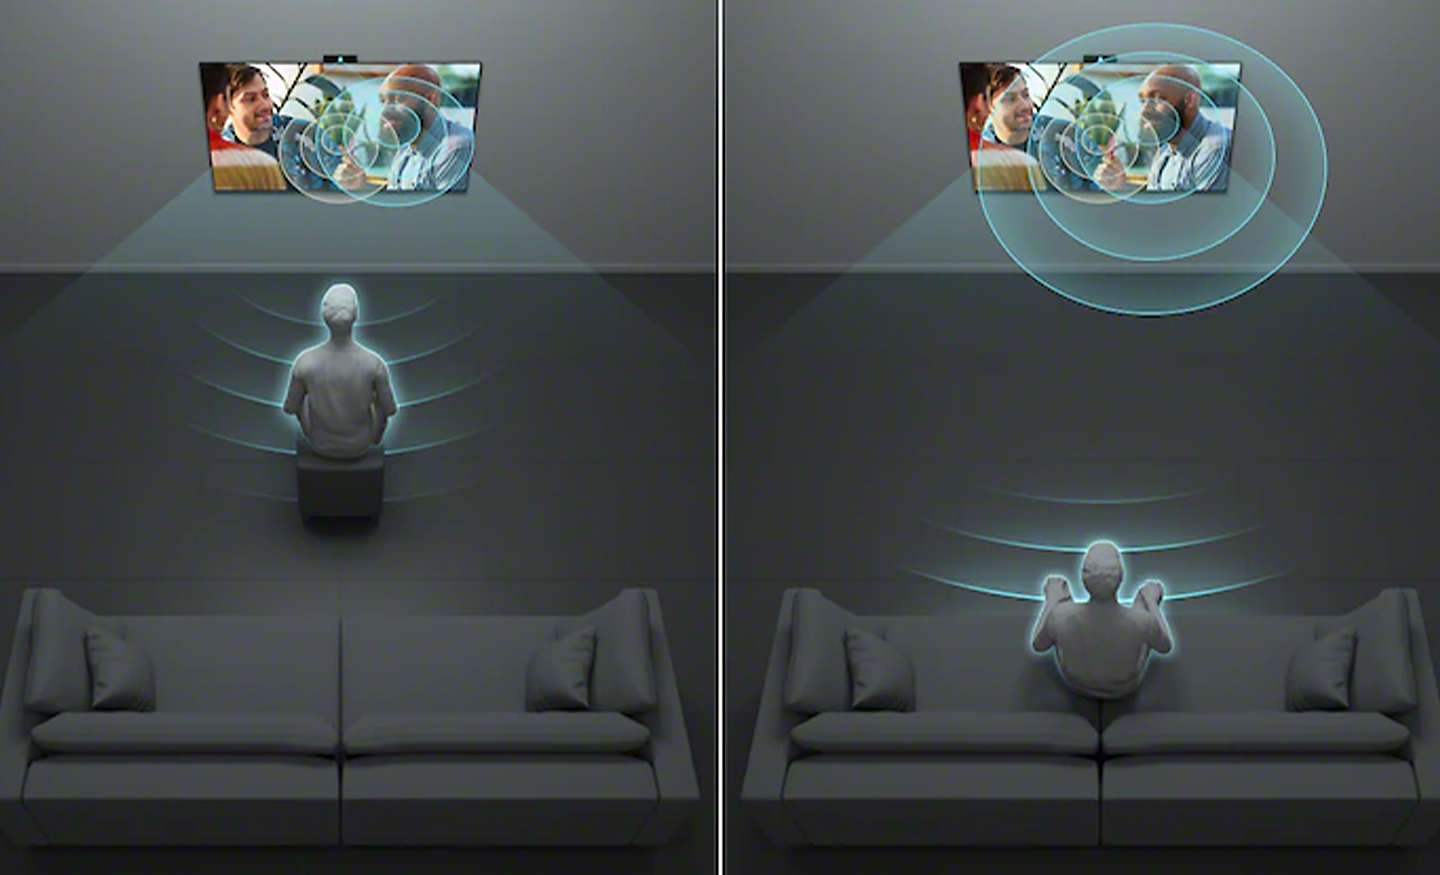 Split screen graphic showing a person listening to TV close up and a person listening to another TV from afar